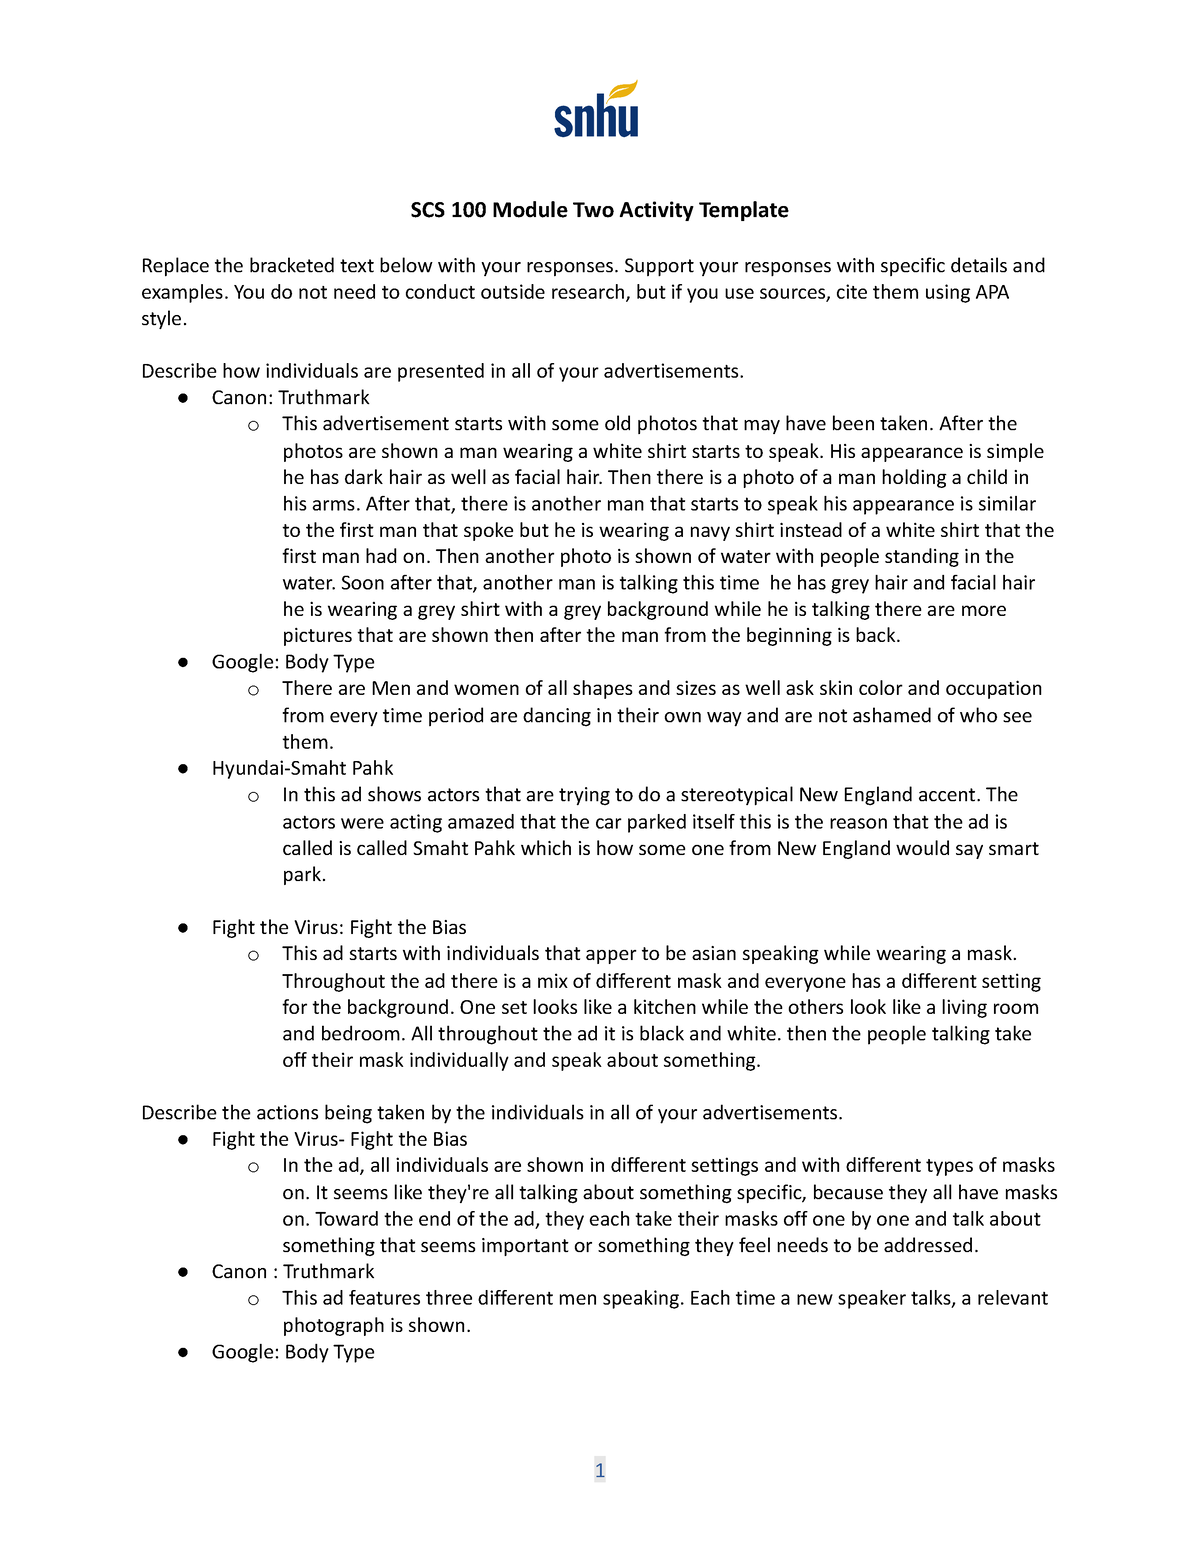 scs-100-module-two-activity-template